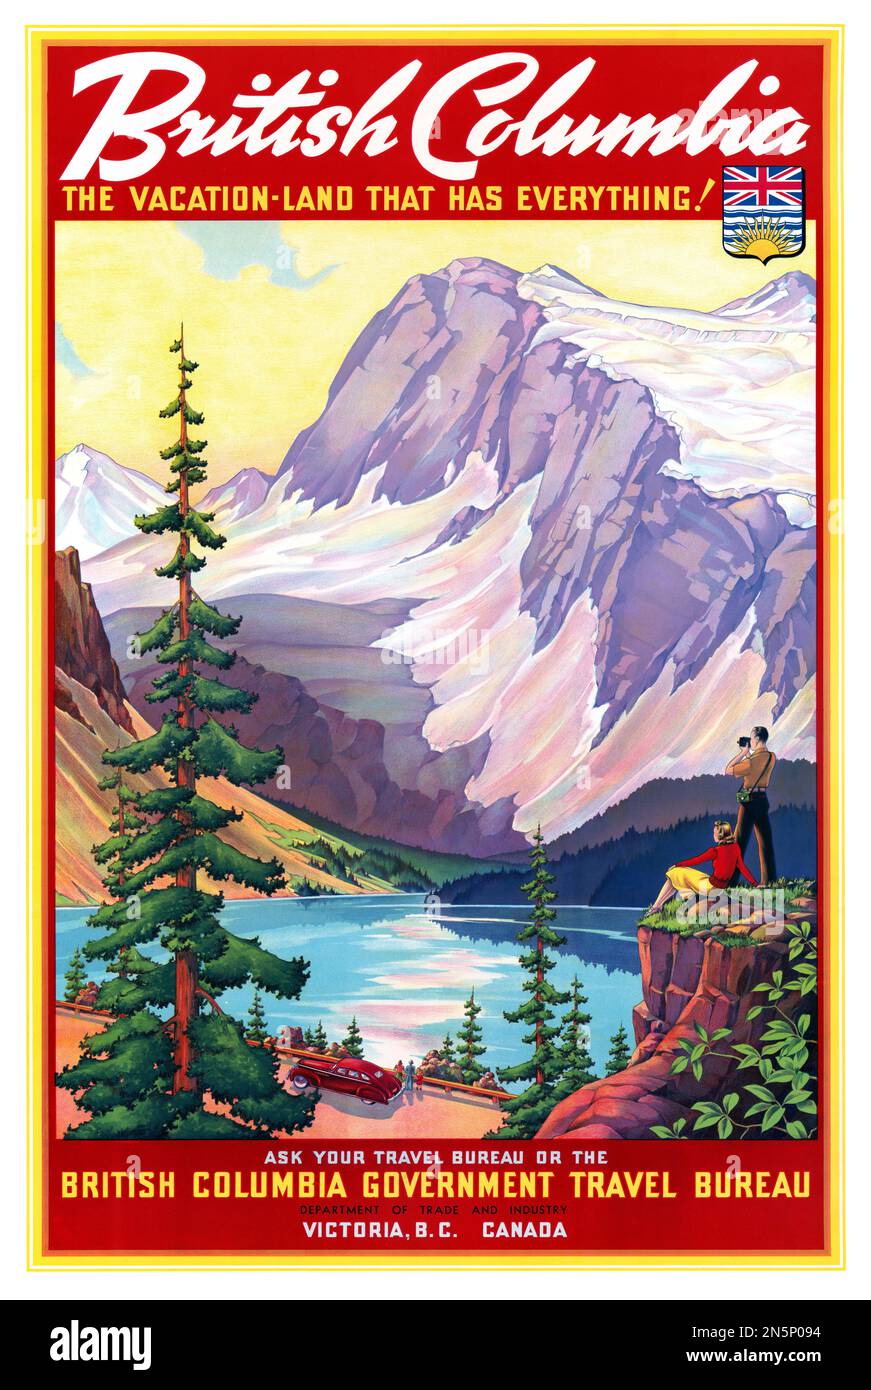 British Columbia, the vacation-land that has everything! Artist unknown. Poster published ca. 1950 in Canada. Stock Photo